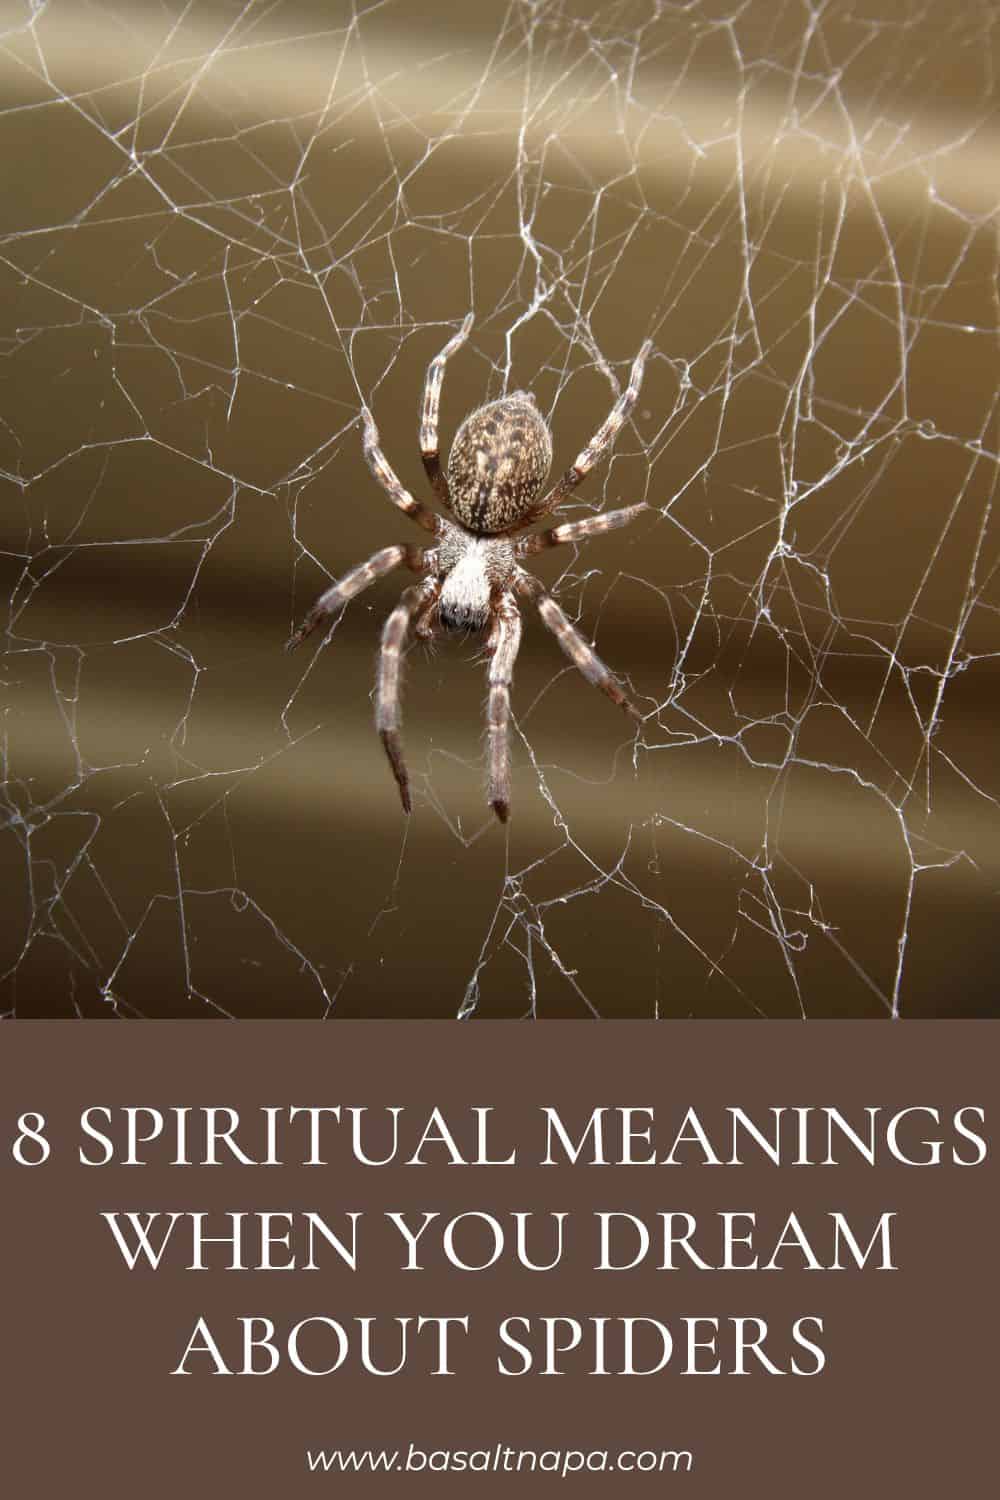 Spiritual Meanings When You Dream About Spiders